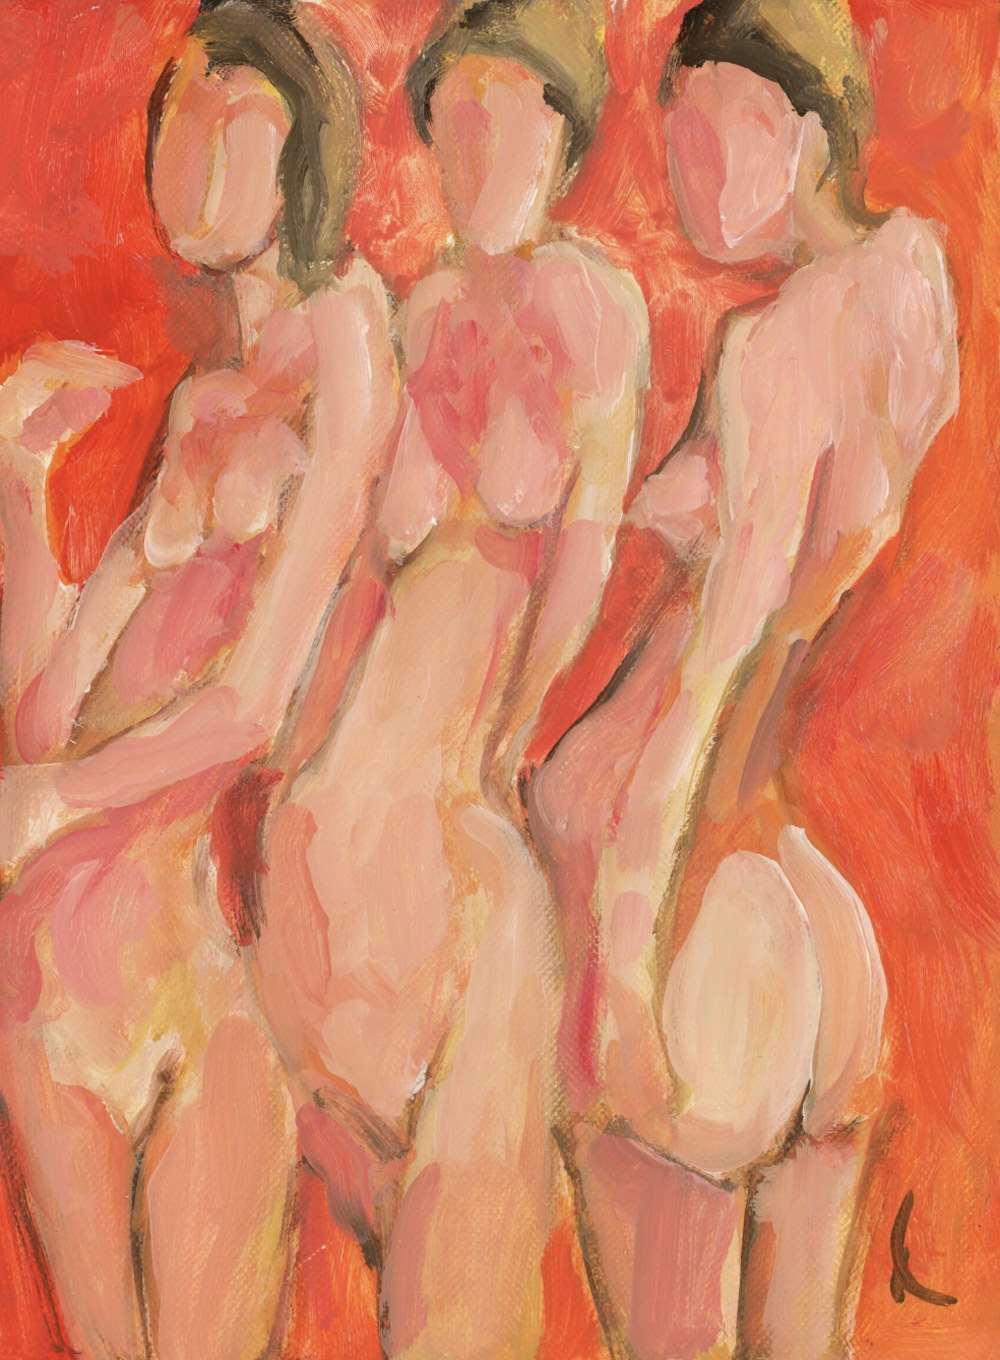 Womankind celebrates femininity with interpretive works—paintings, photography, sculpture, costumes, busts—to bring awareness to breast cancer and women’s health.